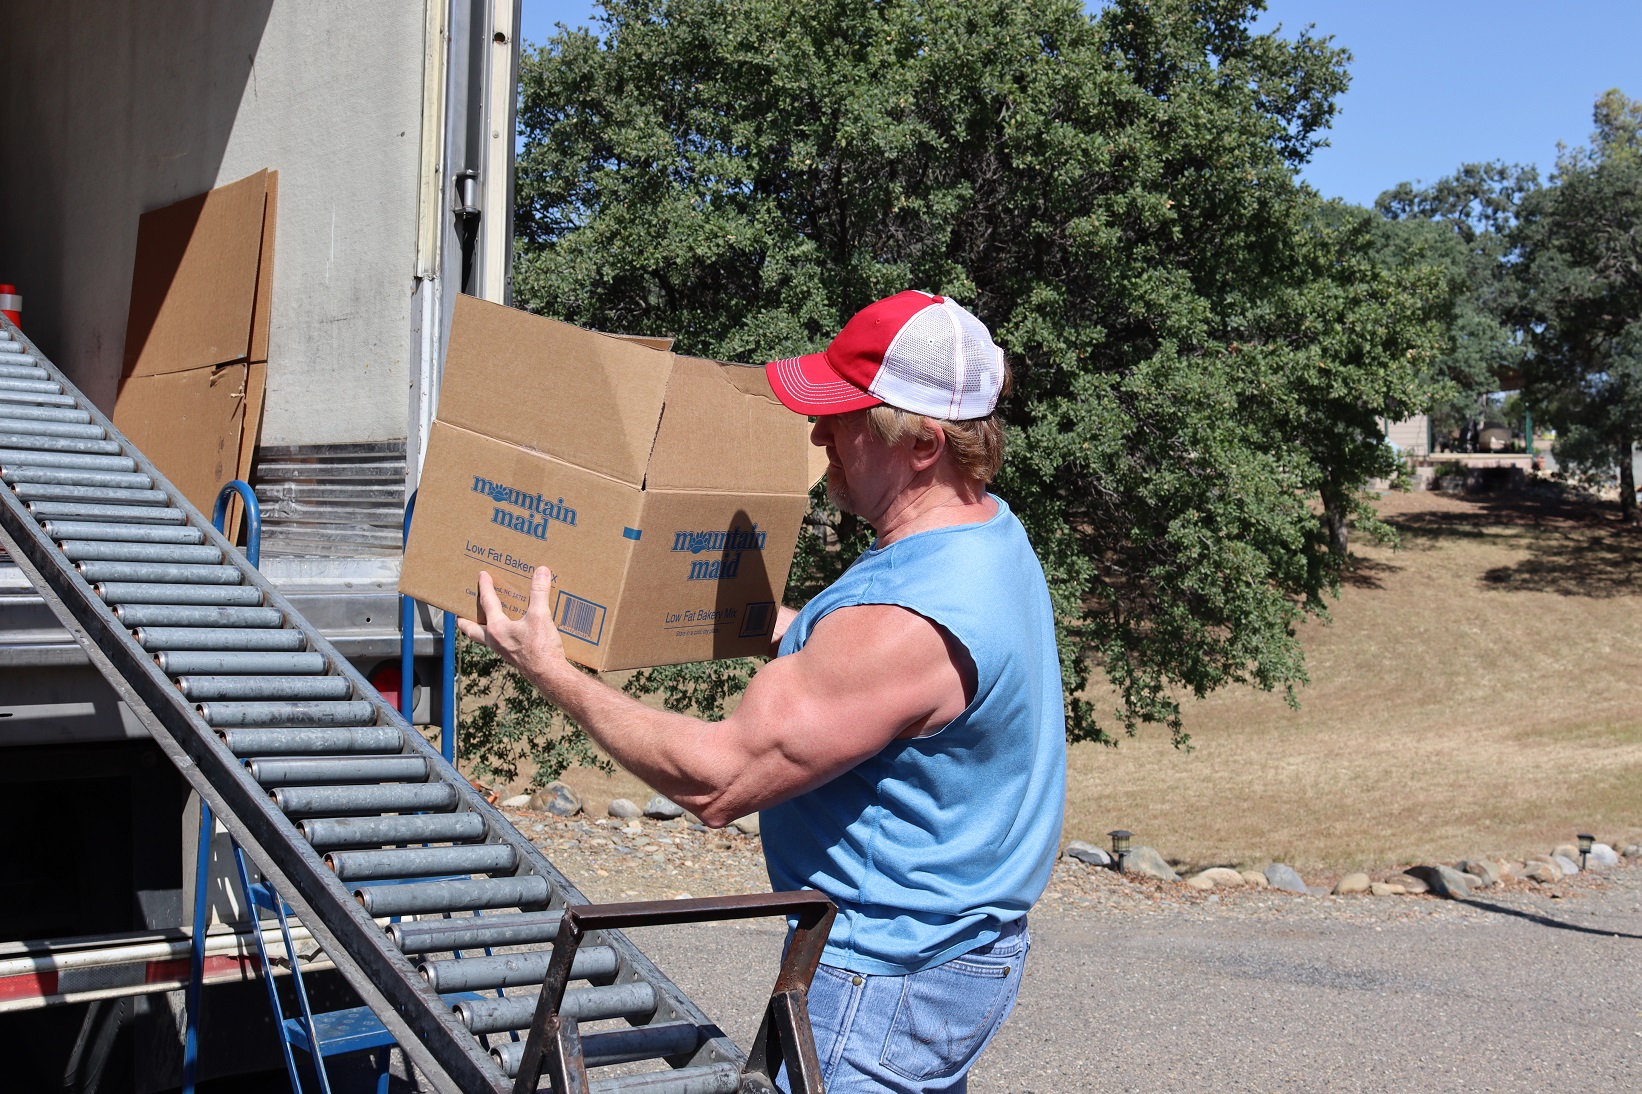 California Valley Miwok Tribe's staff Tiger Paulk carrying goods boxes during a distribution.